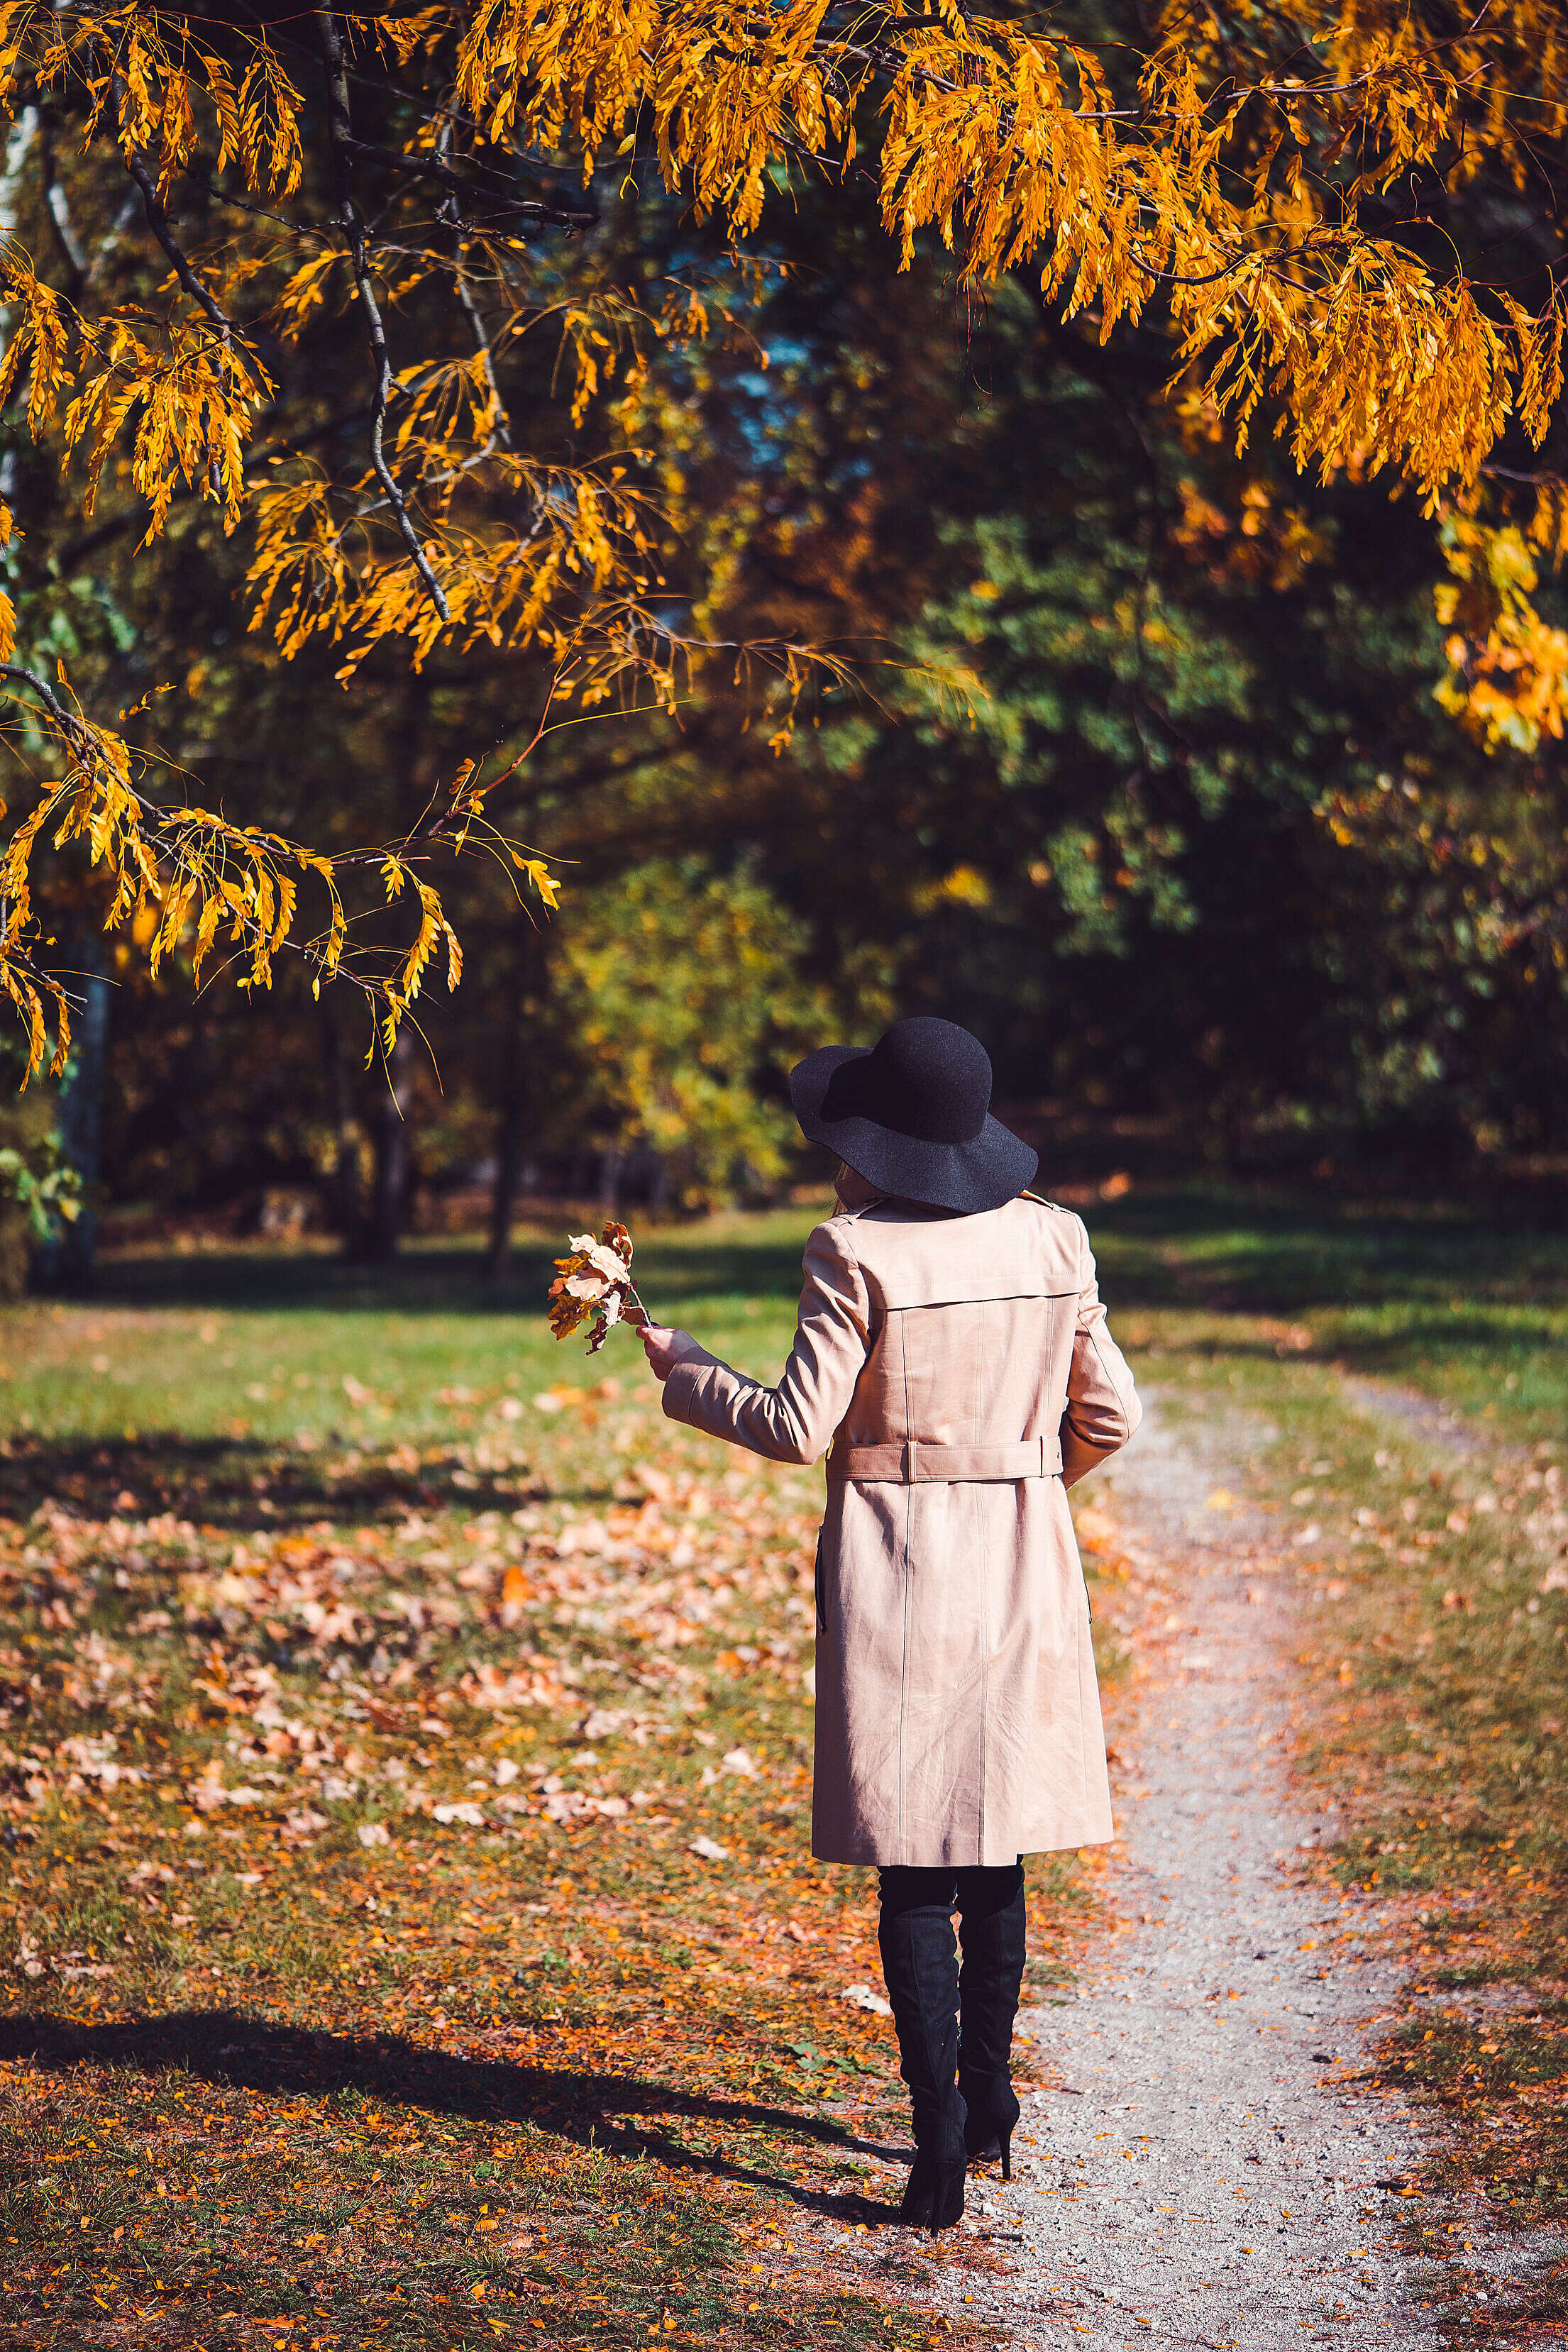 Woman in a Park Holding Leaves on a Sunny Autumn Day Free Stock Photo